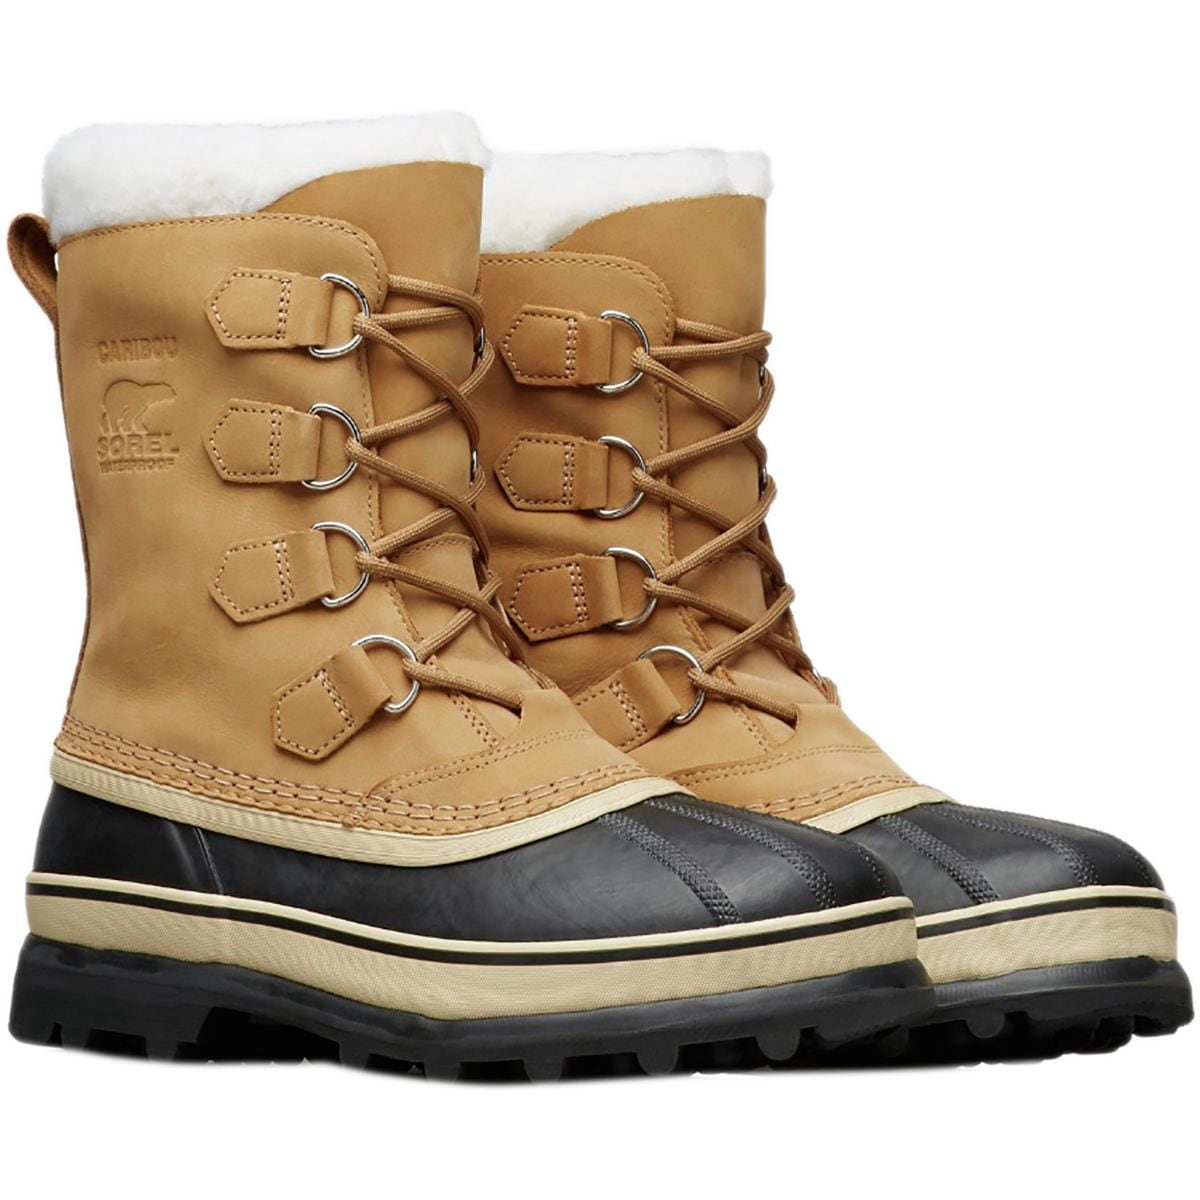 womens caribou boot